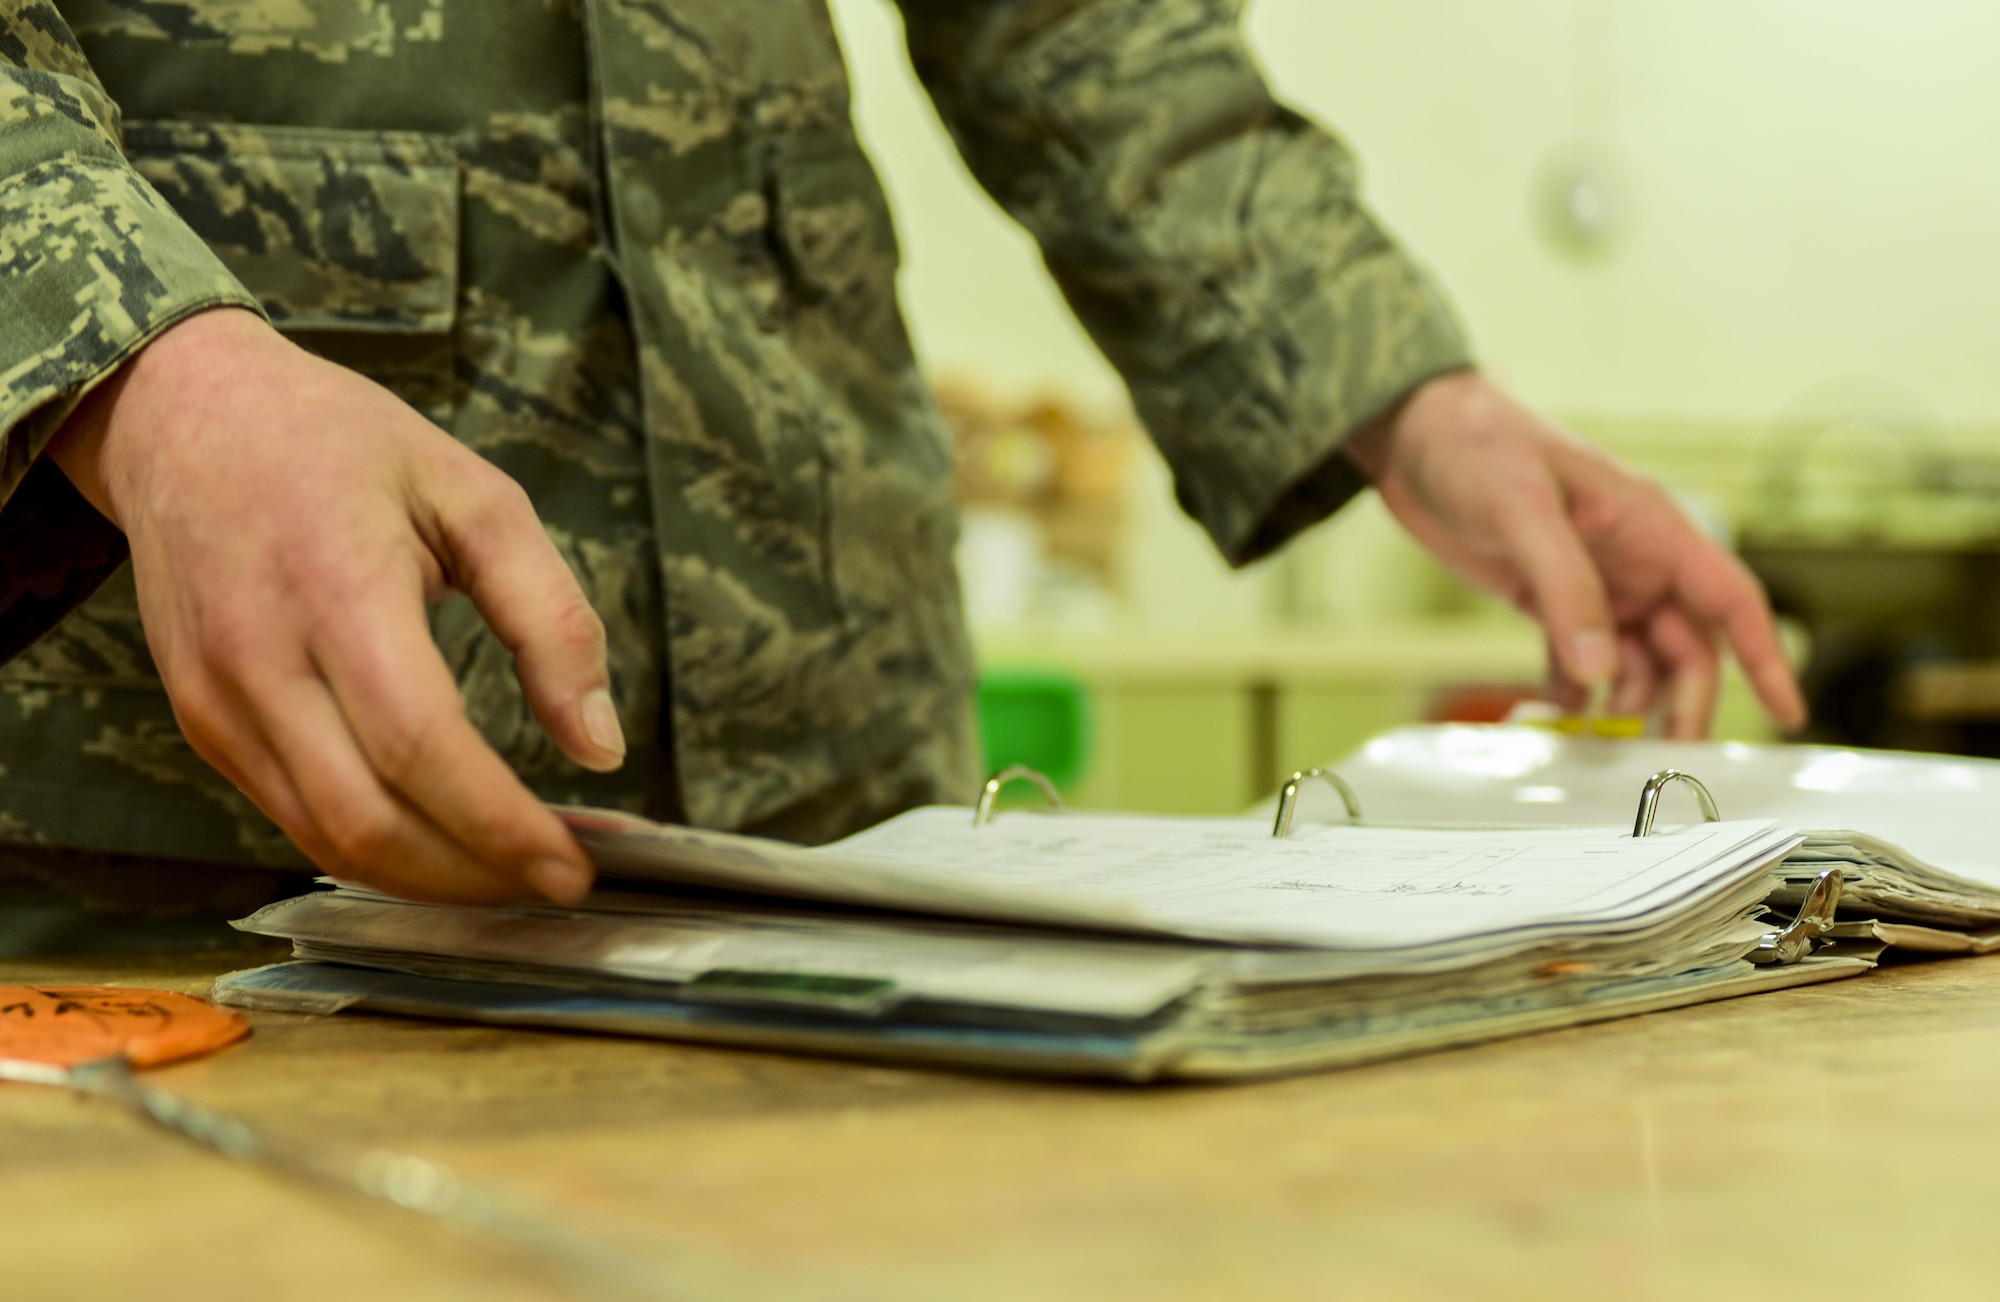 Senior Airman Mark Lee, an Electrical and Environmental craftsman assigned to the 28th Maintenance Squadron, opens a binder inside the E&E back shop at Ellsworth Air Force Base, S.D, April 12, 2017. While troubleshooting components of the B-1 bomber, E&E Airmen sign in parts, assess the problem, order equipment and fix the parts as necessary. (U.S. Air Force photo by Airman 1st Class Randahl J. Jenson)